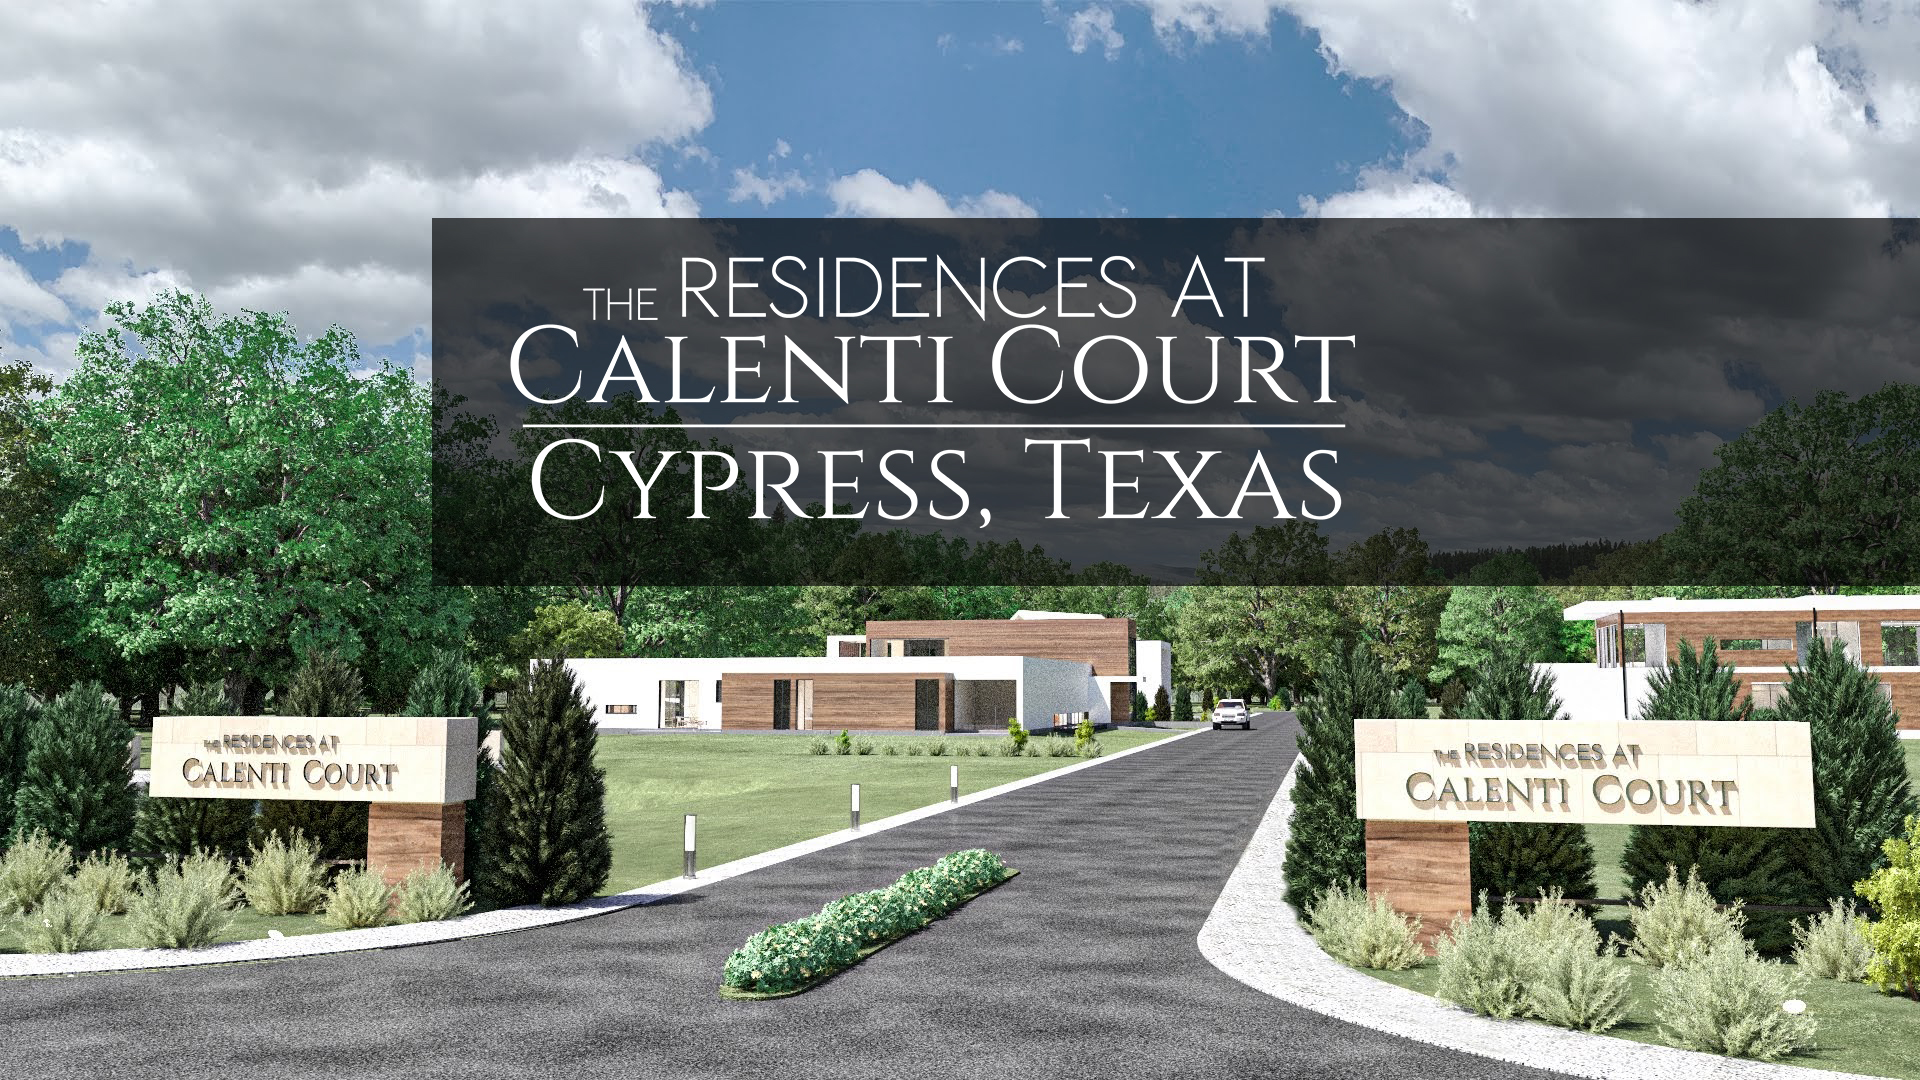 the Residences at Calenti Court  Cypress Texas community view